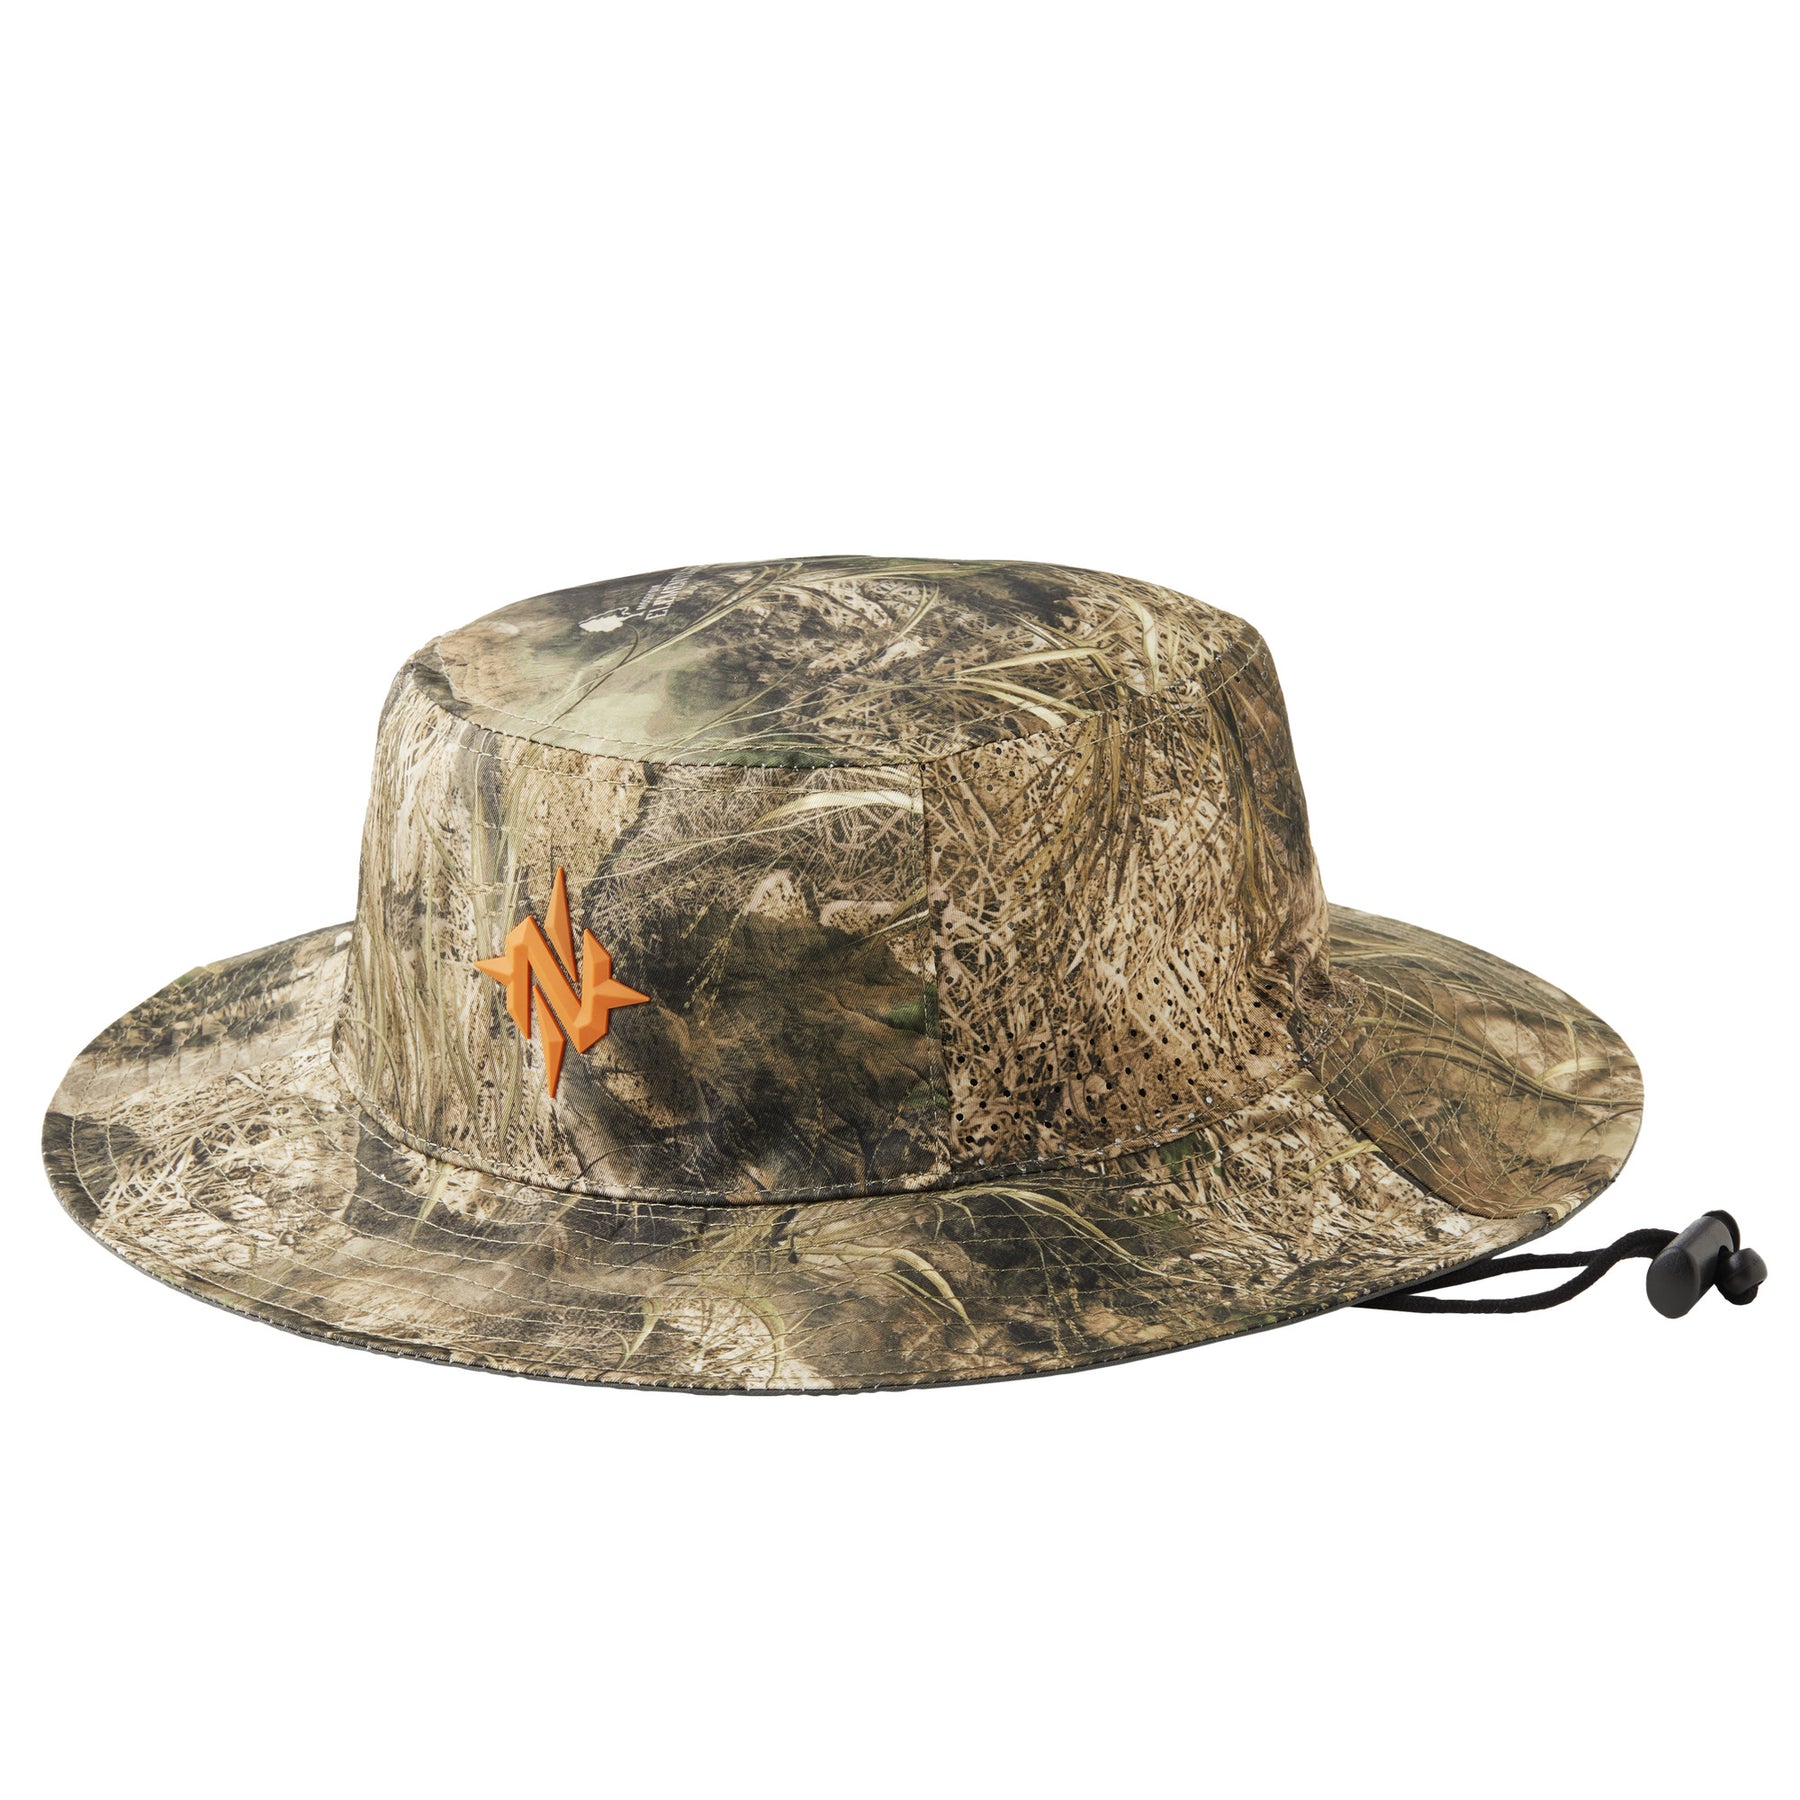 BUILTCOOL Men's Camo Bucket Hat - Boonie Cap for Fishing, Hunting, Camping,  and Kayaking